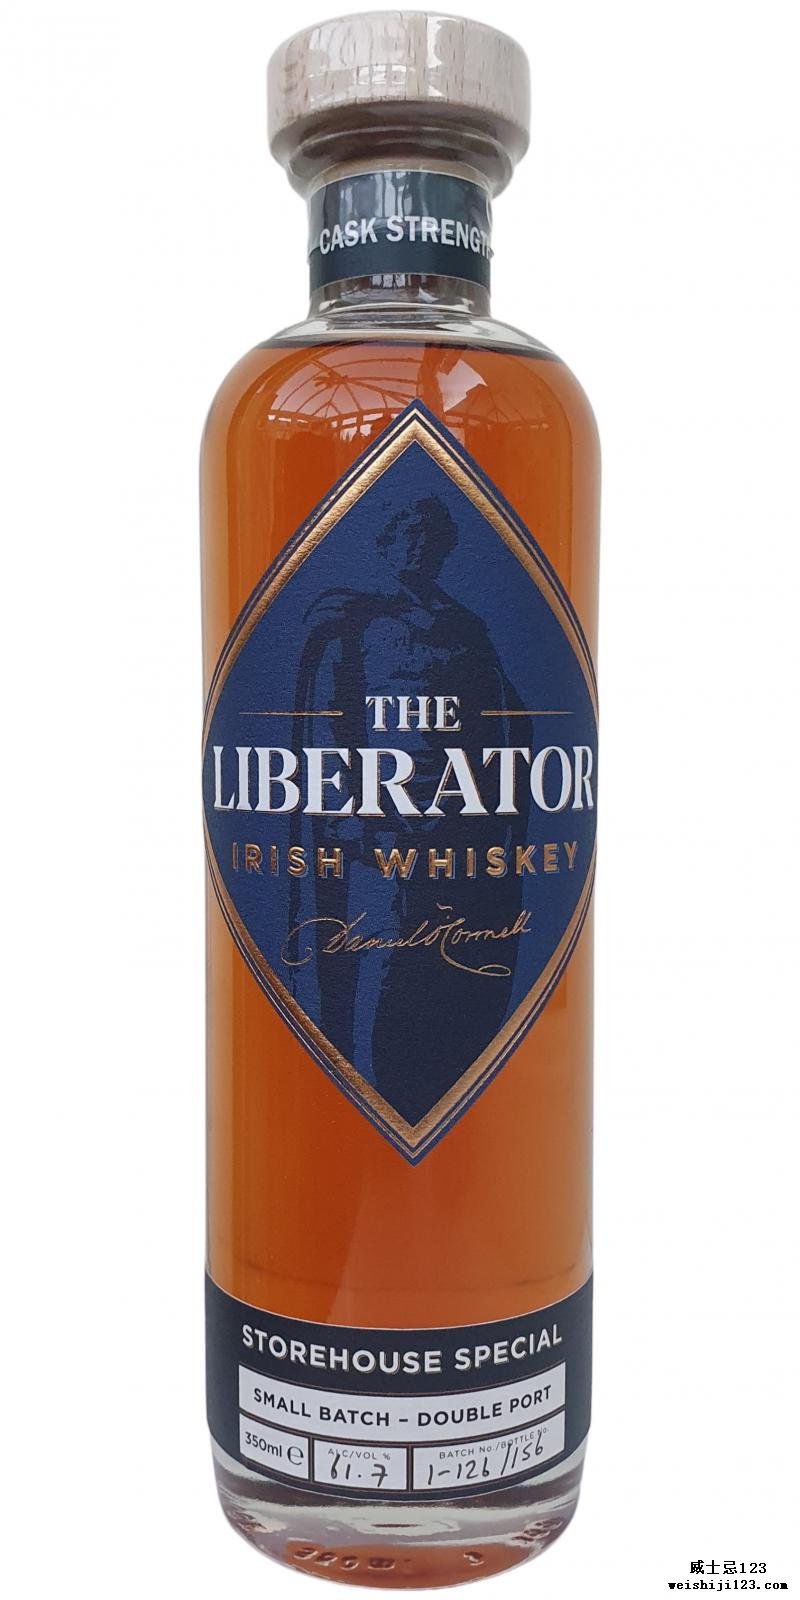 The Liberator Small Batch – Double Port